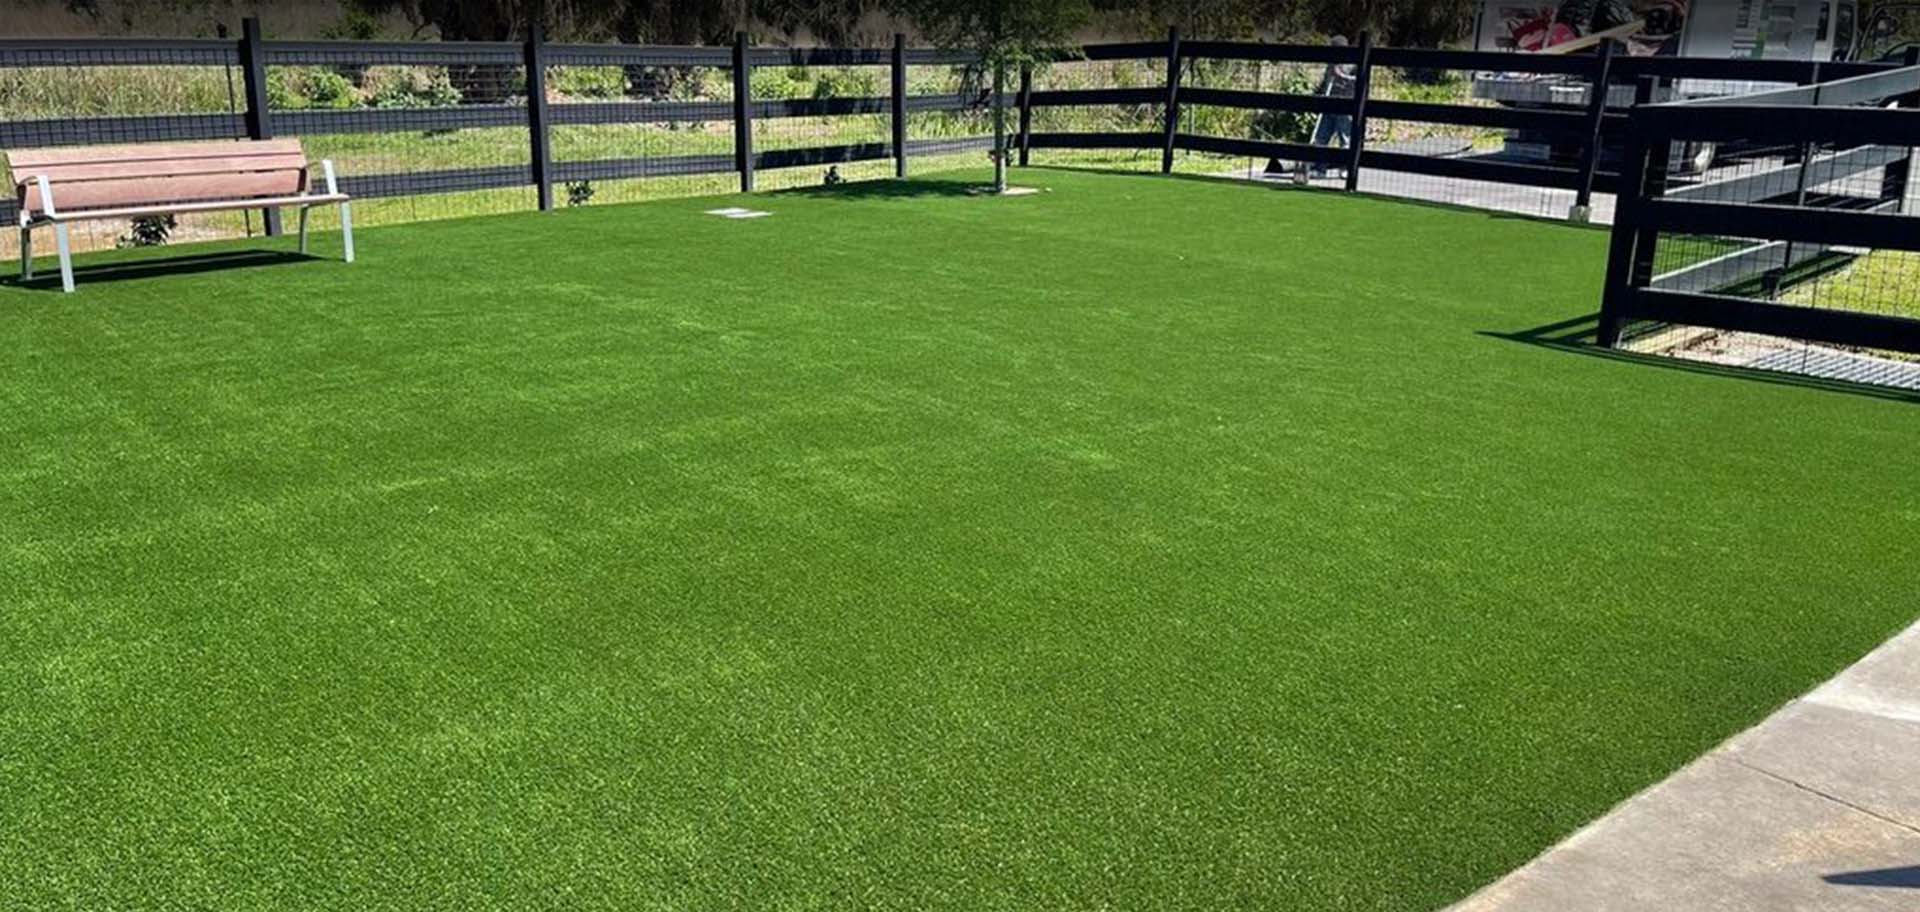 Boca Raton Artificial Grass Installation, Synthetic Turf Installation and Putting Green Installation